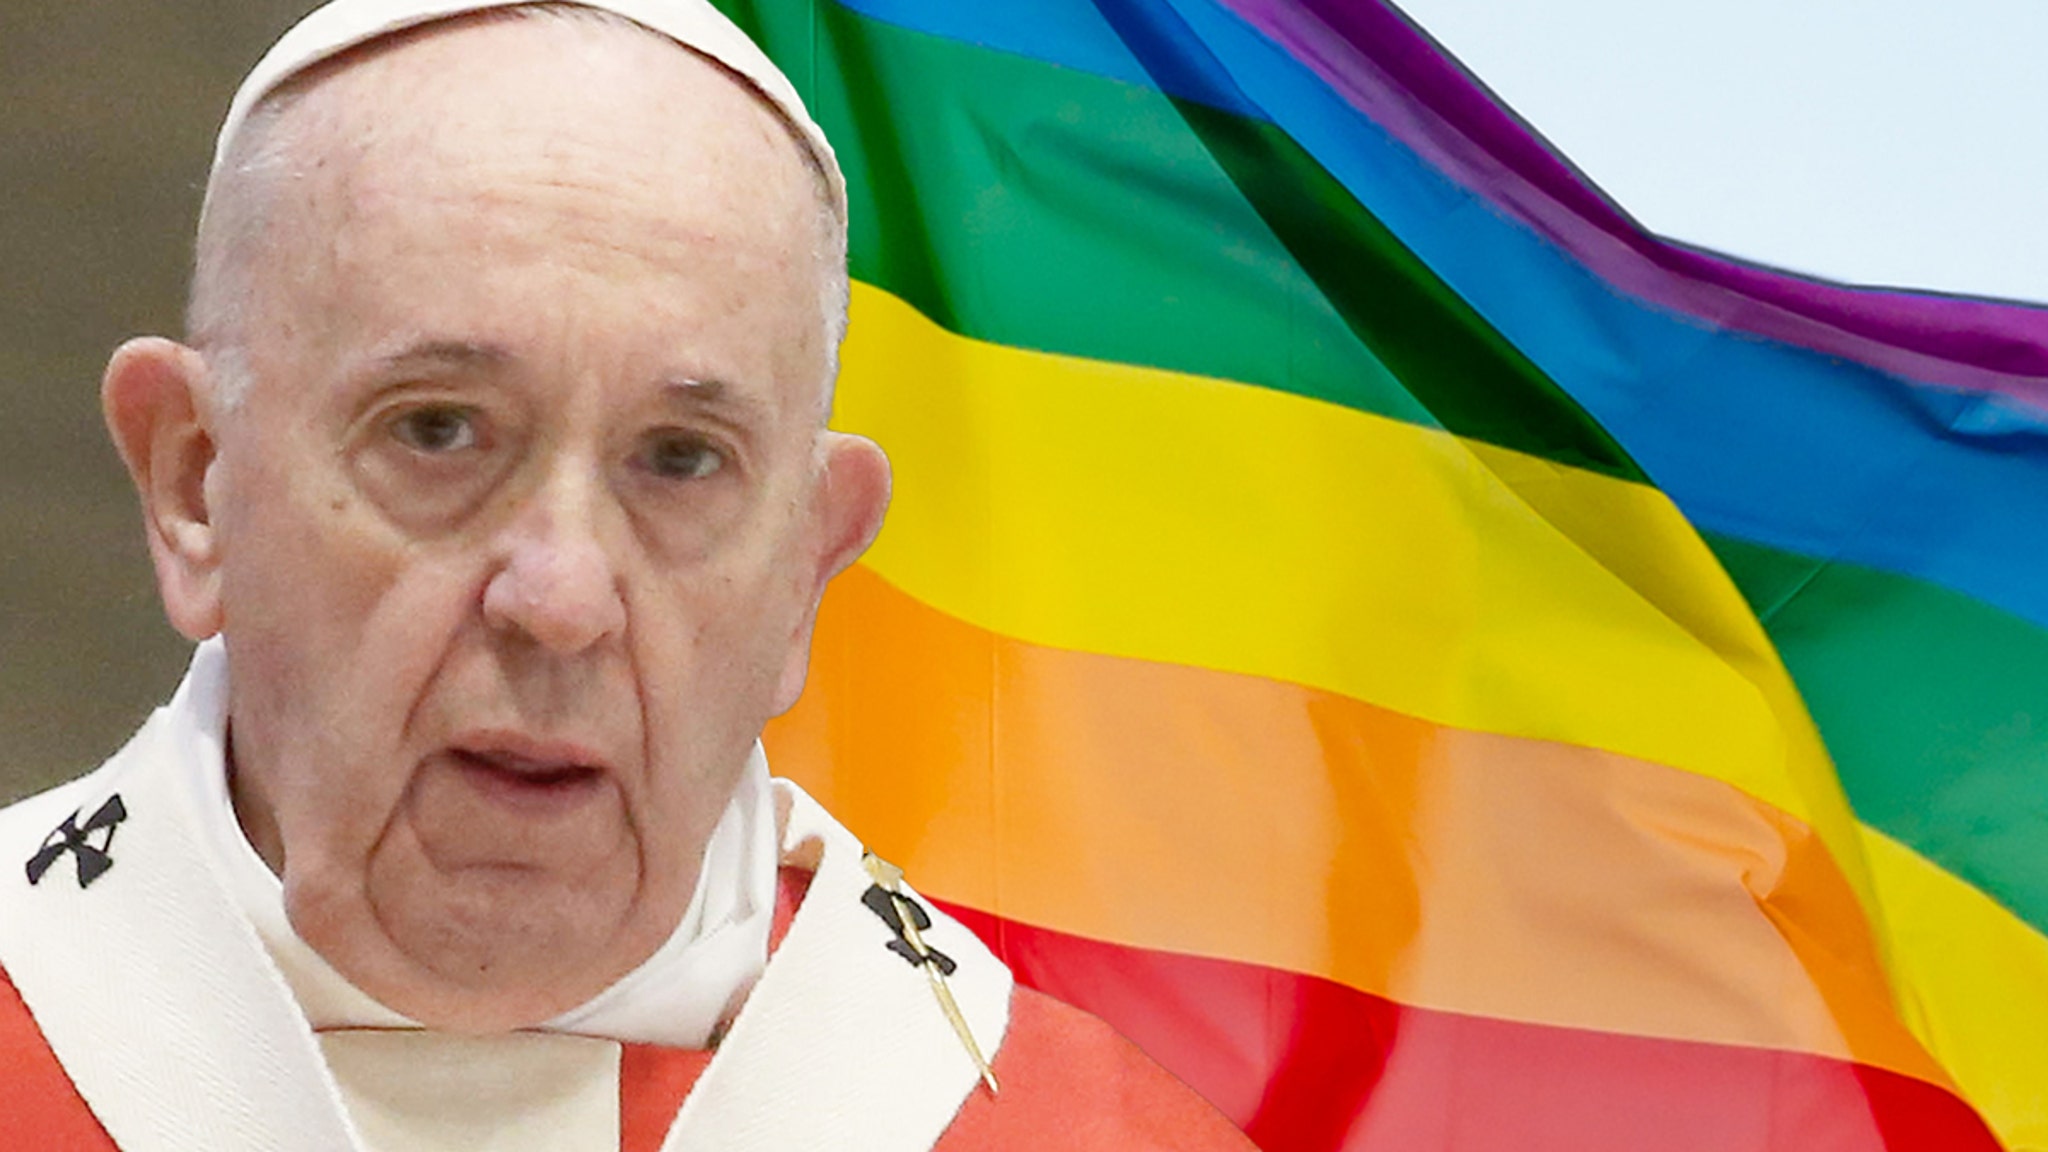 pope-francis-repeats-gay-slur,-already-apologized-for-same-thing